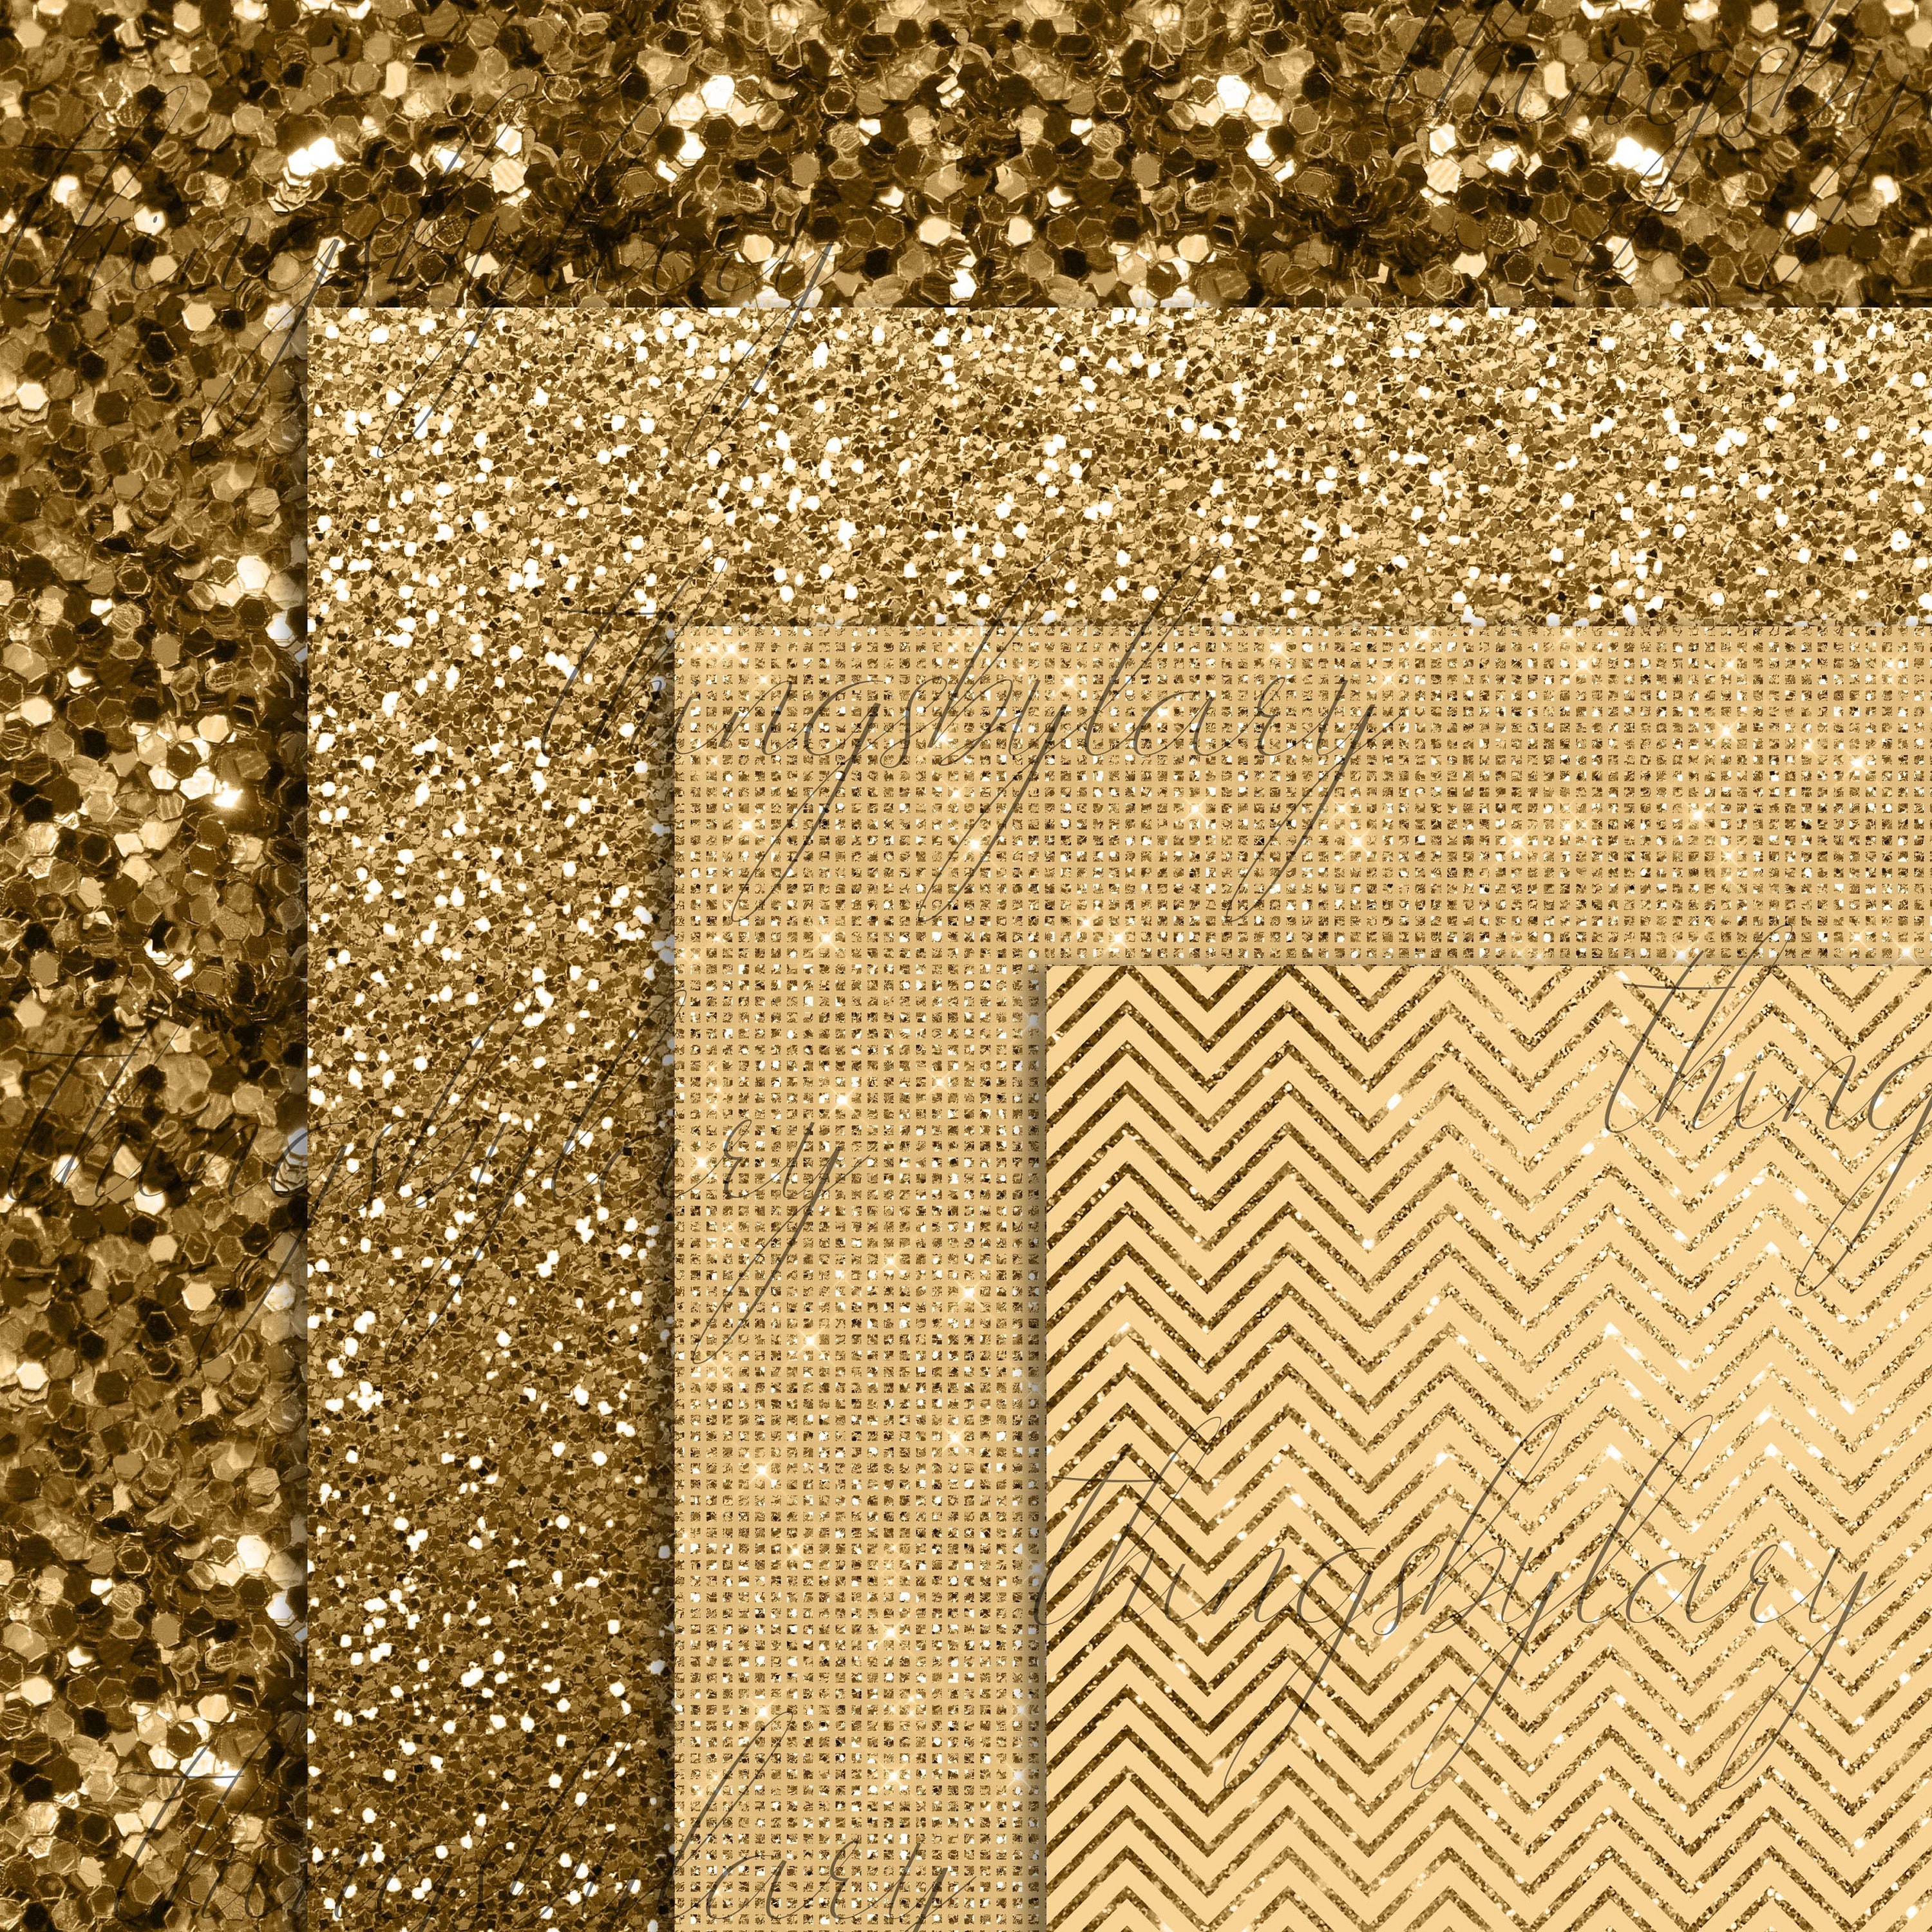 Glitter Paper, Gold & Silver, 12 x 12 - 24 Sheets –